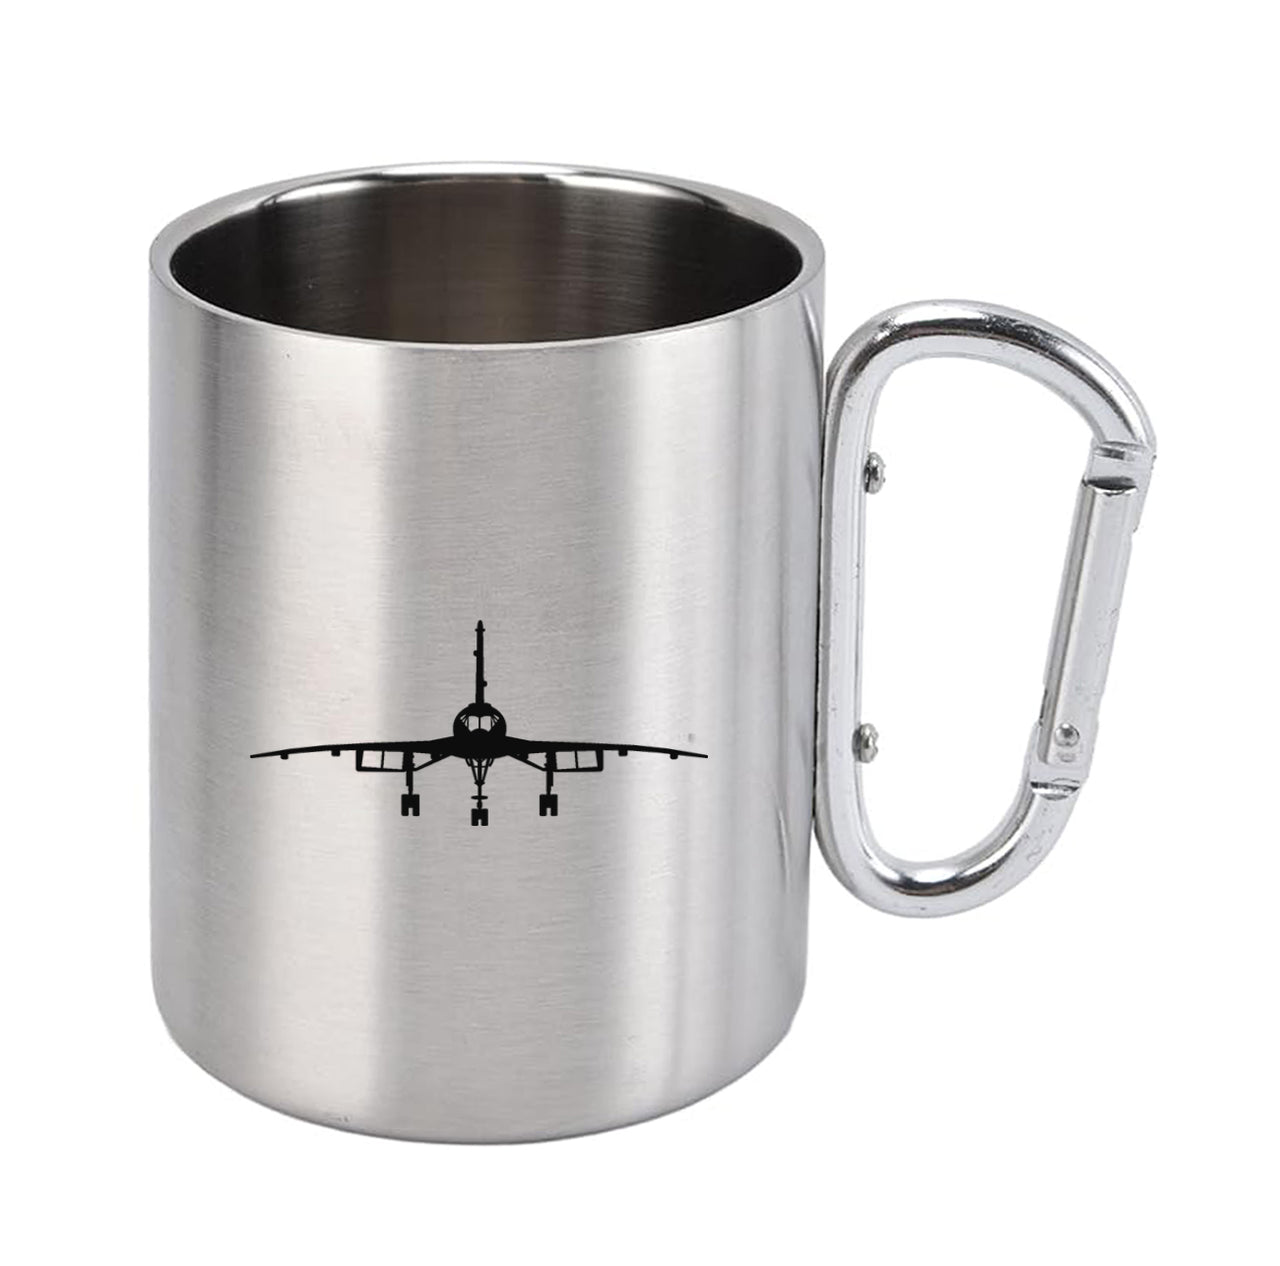 Concorde Silhouette Designed Stainless Steel Outdoors Mugs